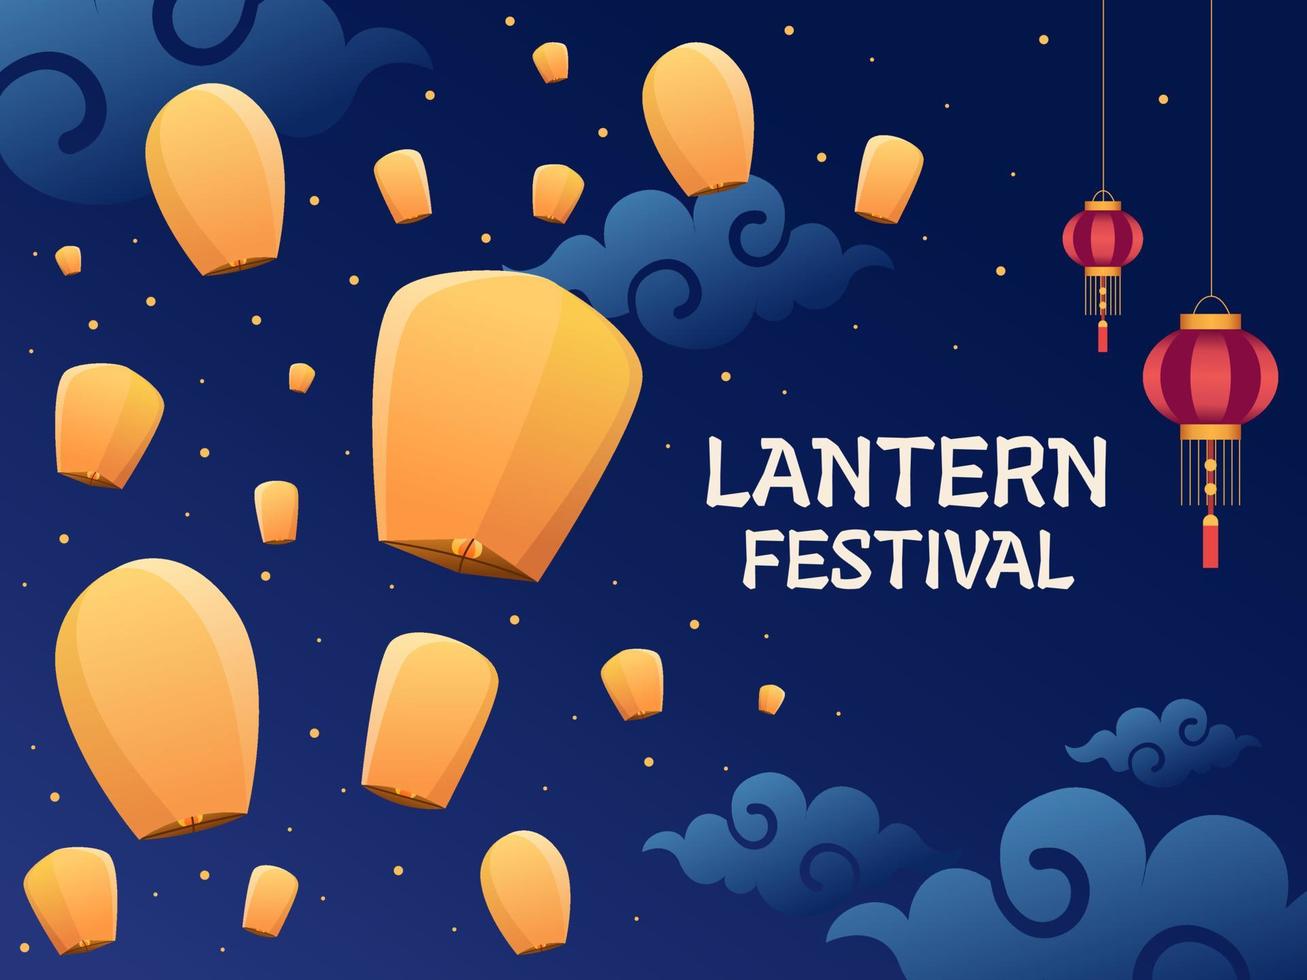 Chinese Lantern Festival illustration with Lanterns Flying in night. Mid Autumn Festival. Can be used for greeting card, postcard, invitation, poster, banner, web, print, animation, etc. vector